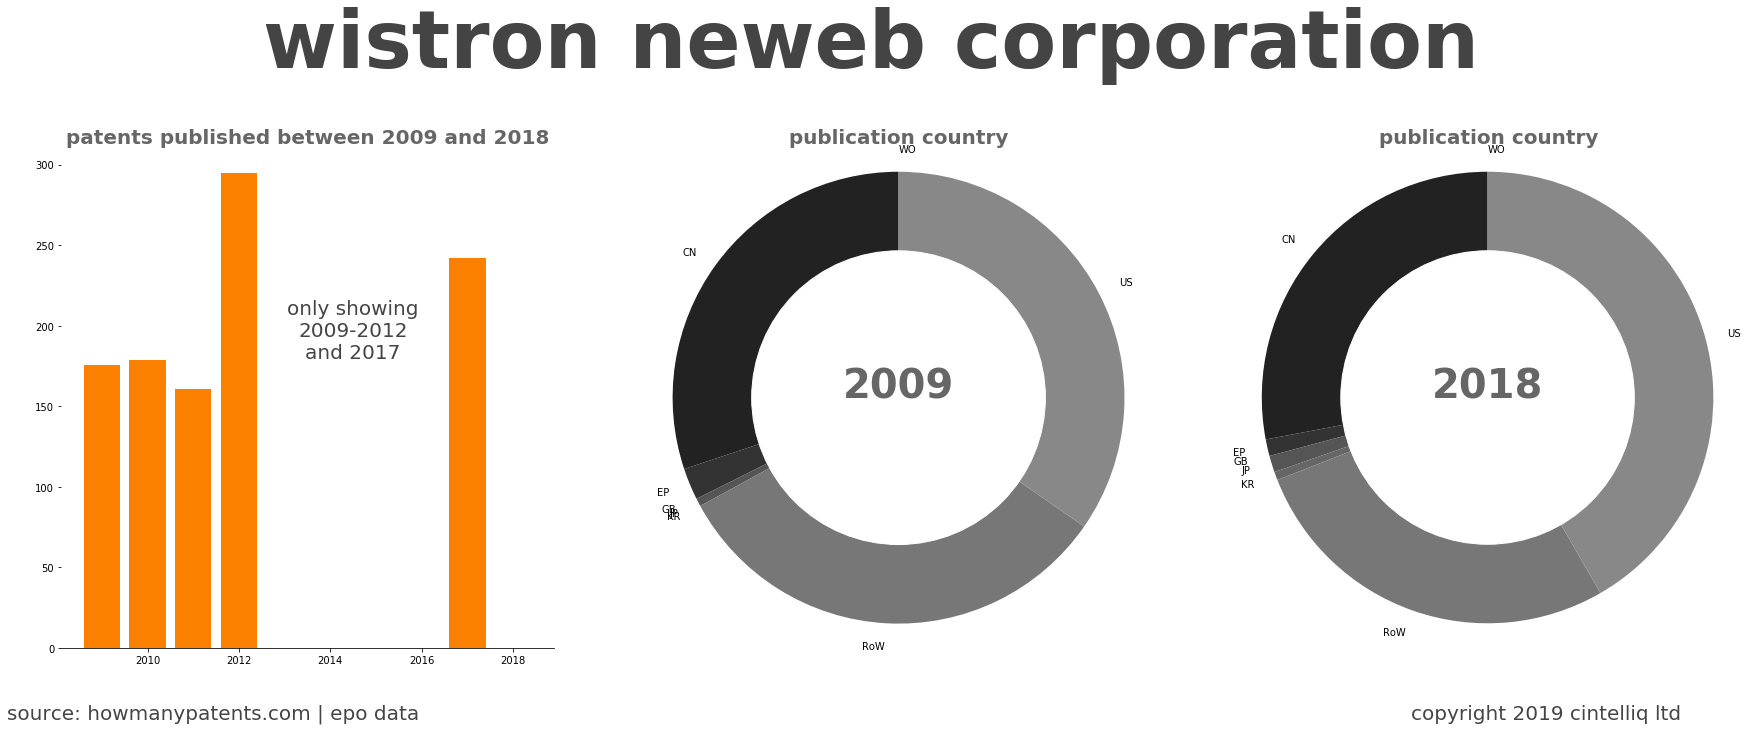 summary of patents for Wistron Neweb Corporation